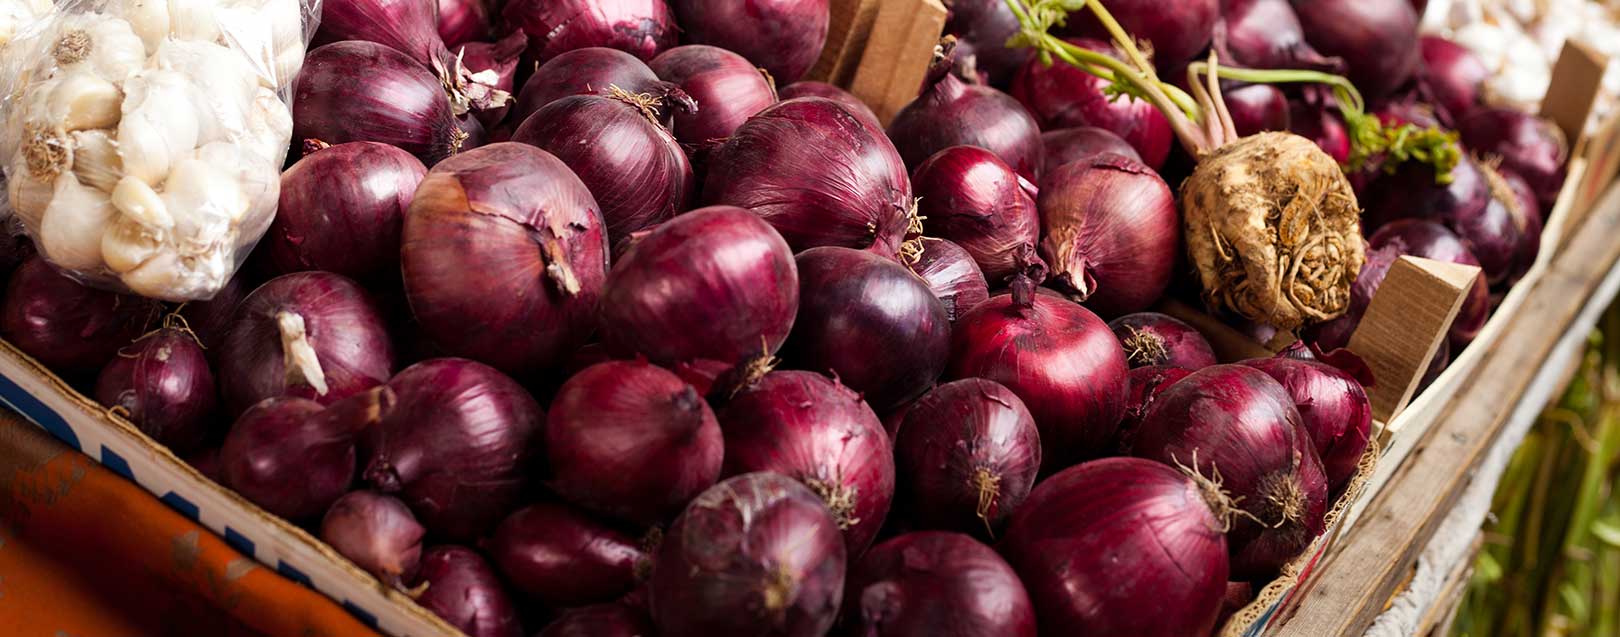 Govt imposes MEP of $850/MT on onions to boost domestic supplies